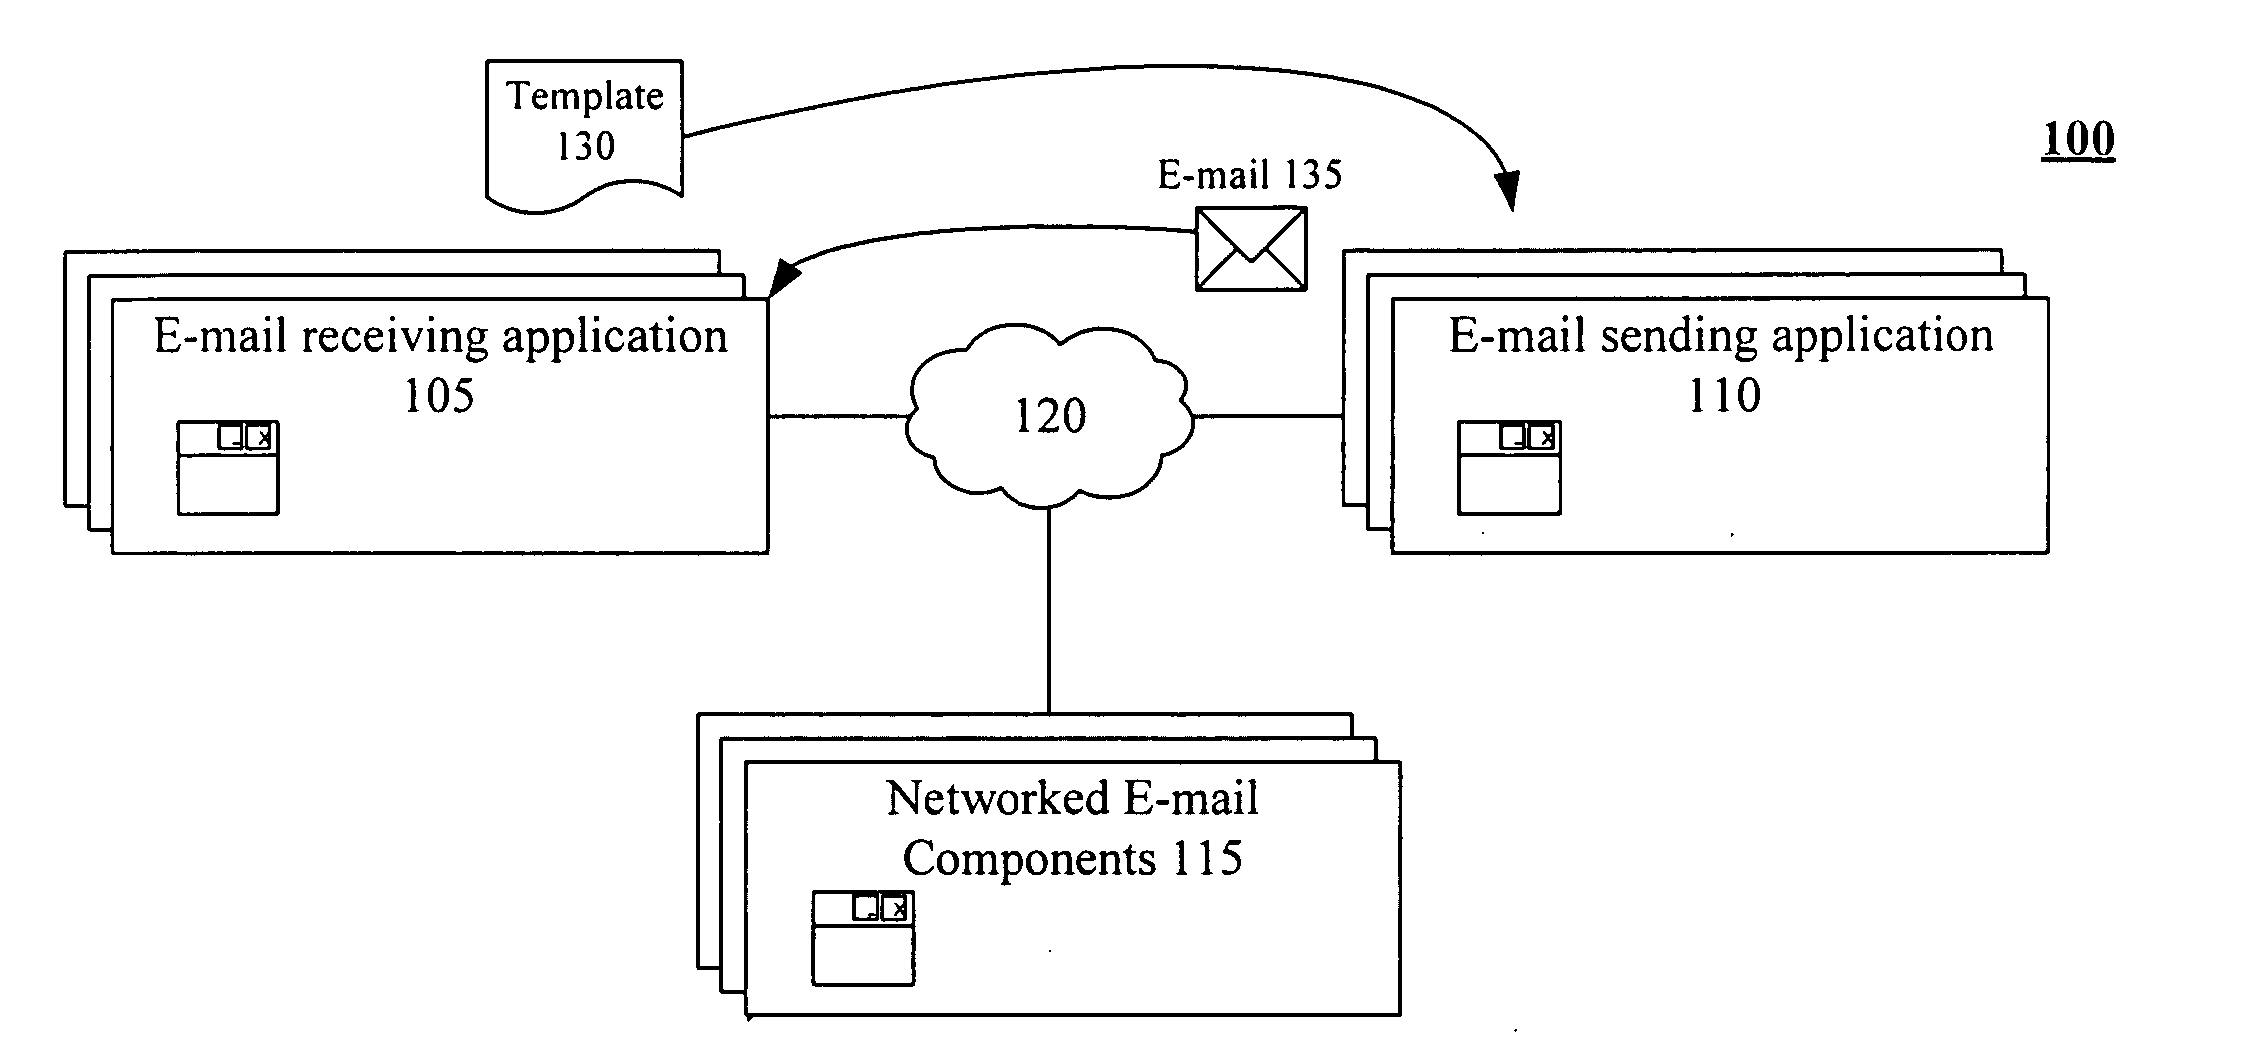 E-mail role templates for classifying e-mail